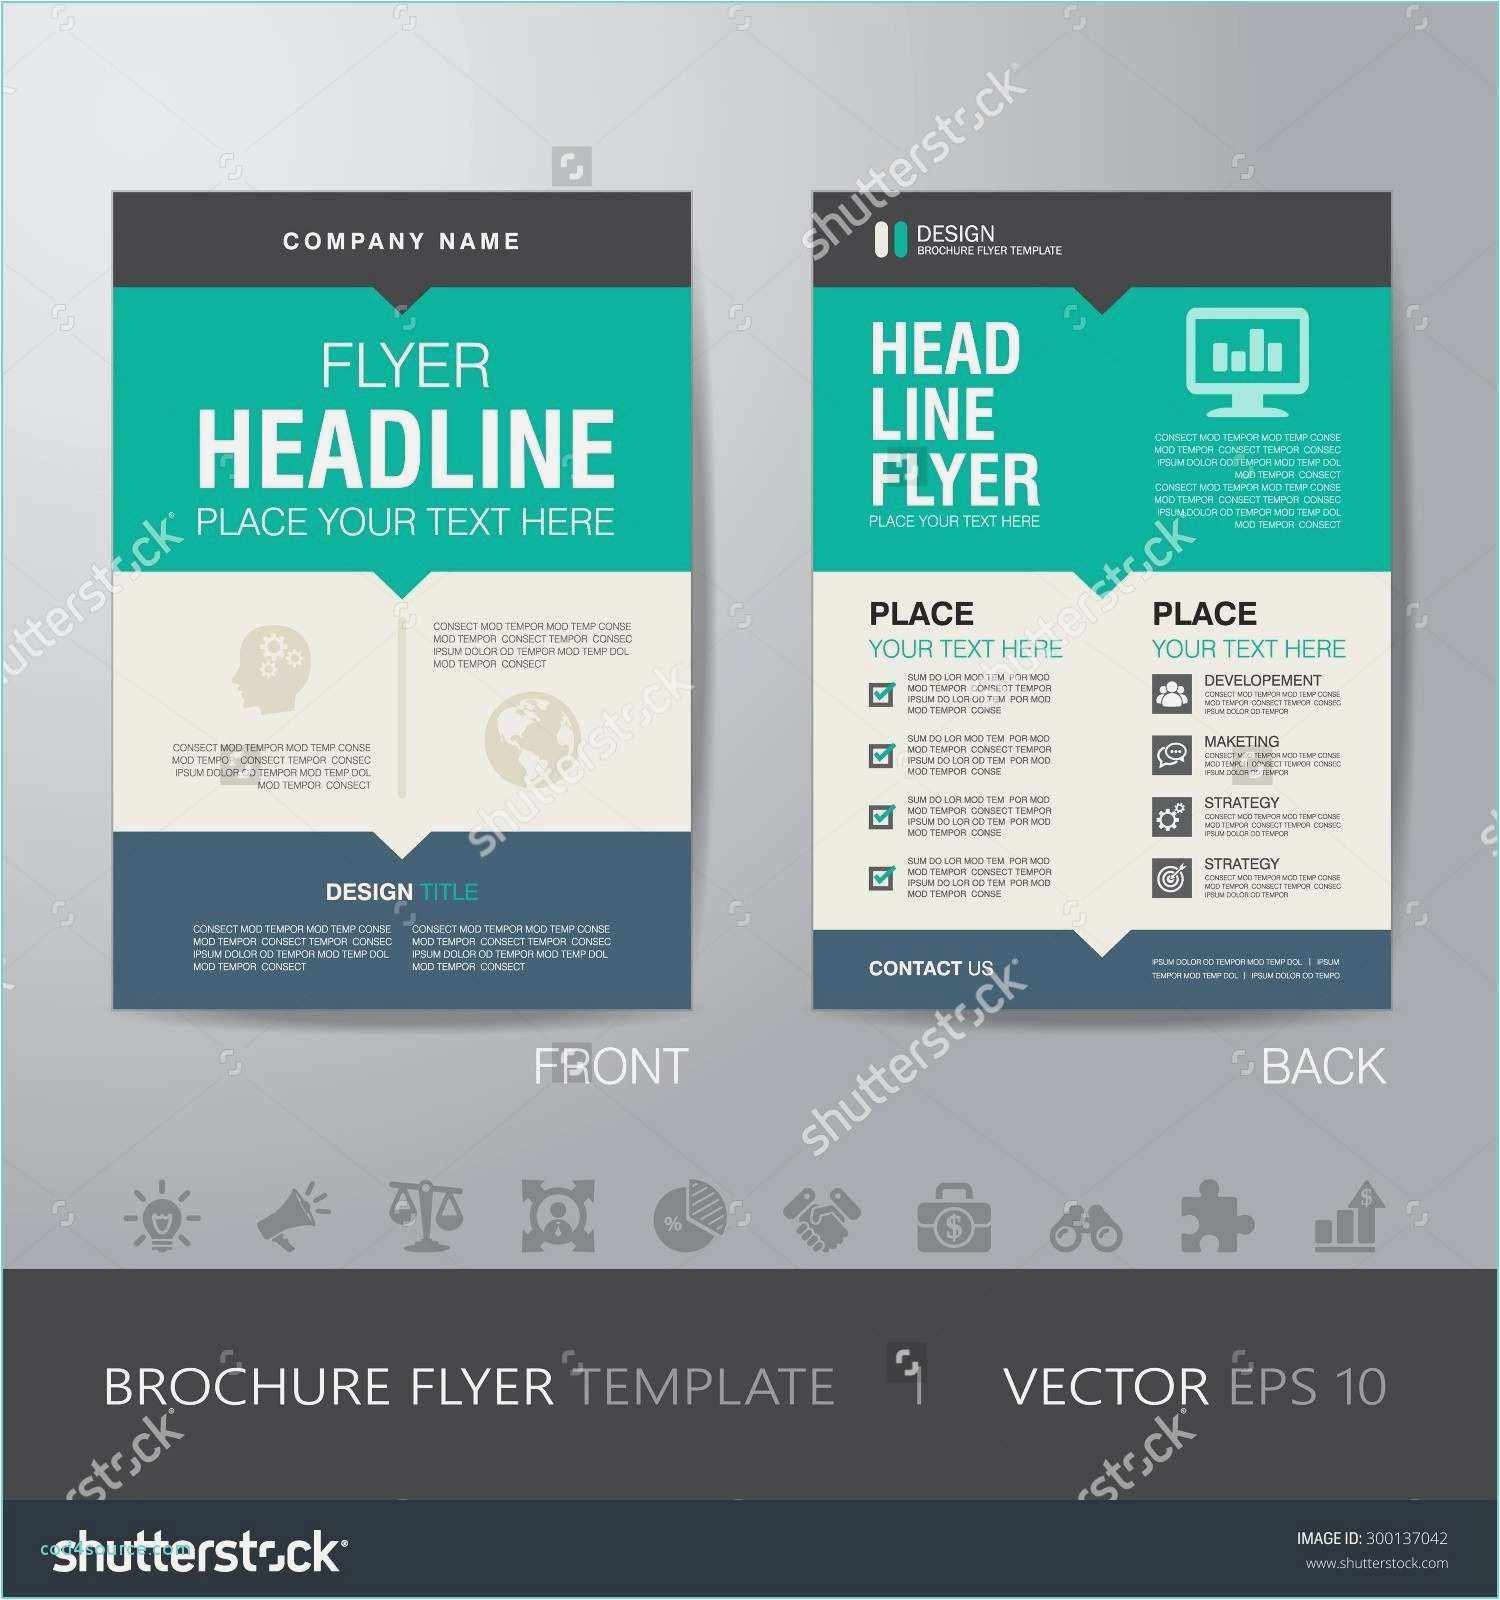 Download 44 Psd Business Card Template Sample Of Transparent Business Card Template